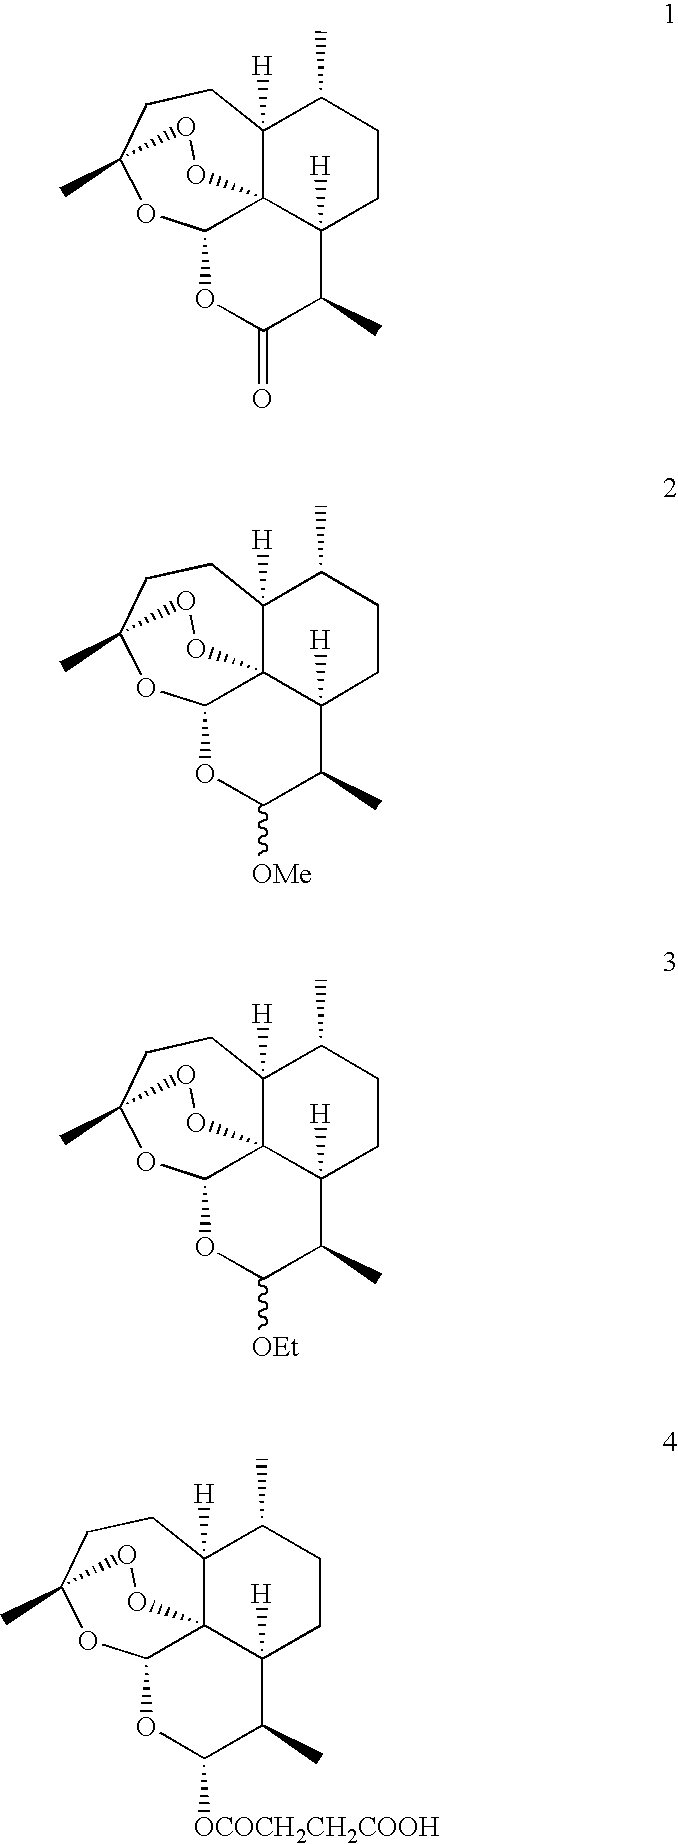 Substituted 1,2,4-trioxanes useful as antimalarial agents and a process for the preparation thereof